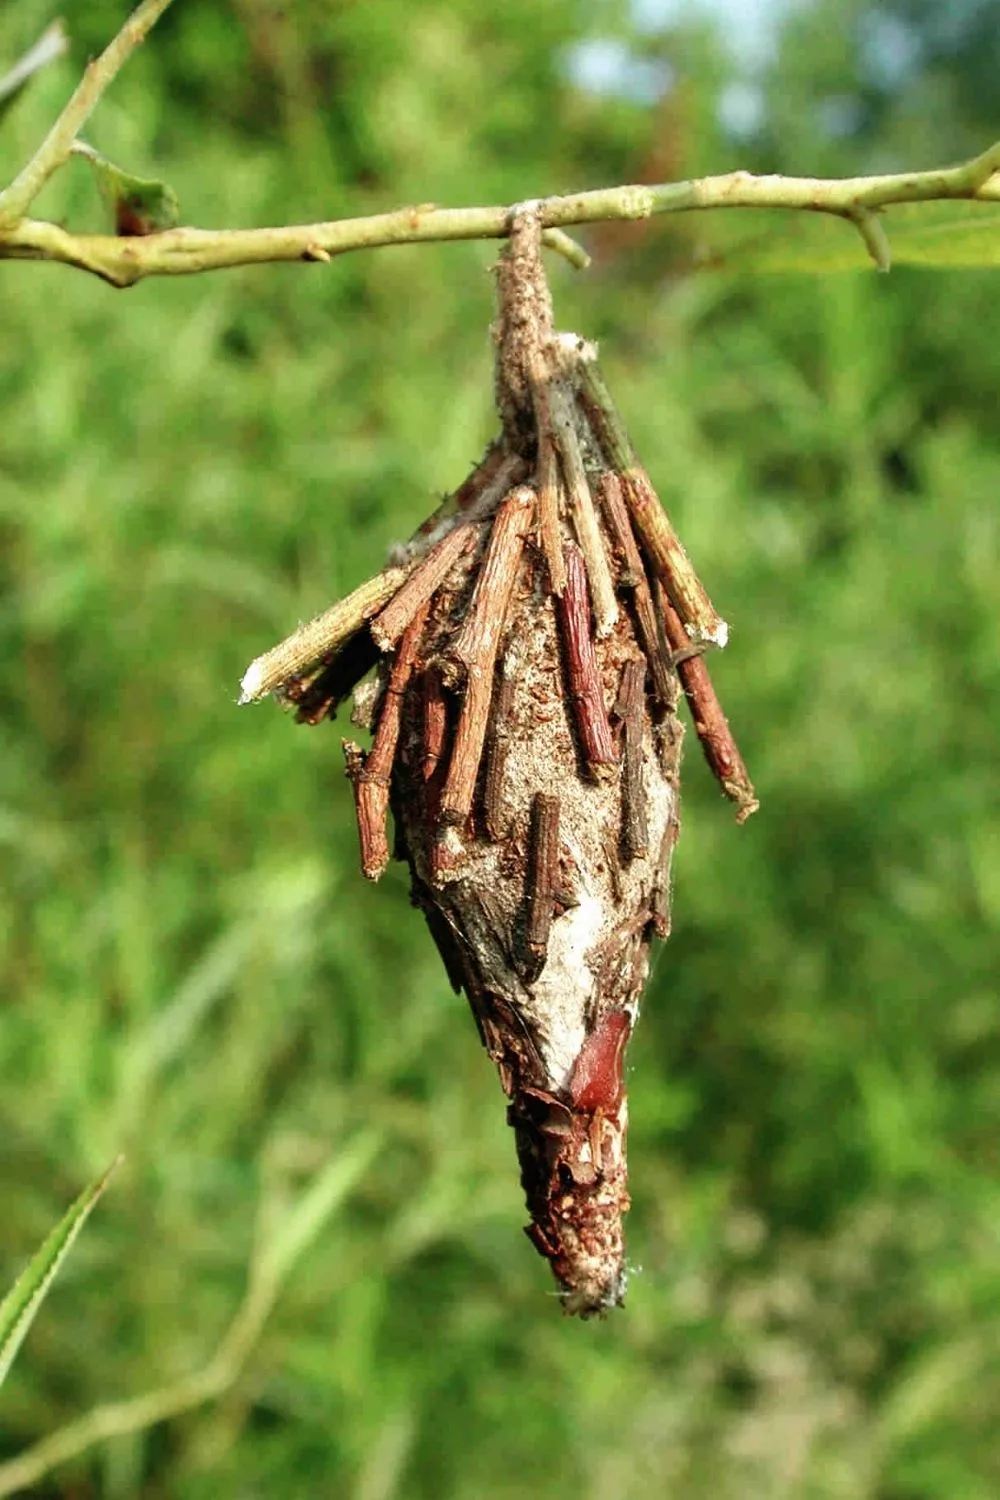 bagworm pouch hanging from a tree branch